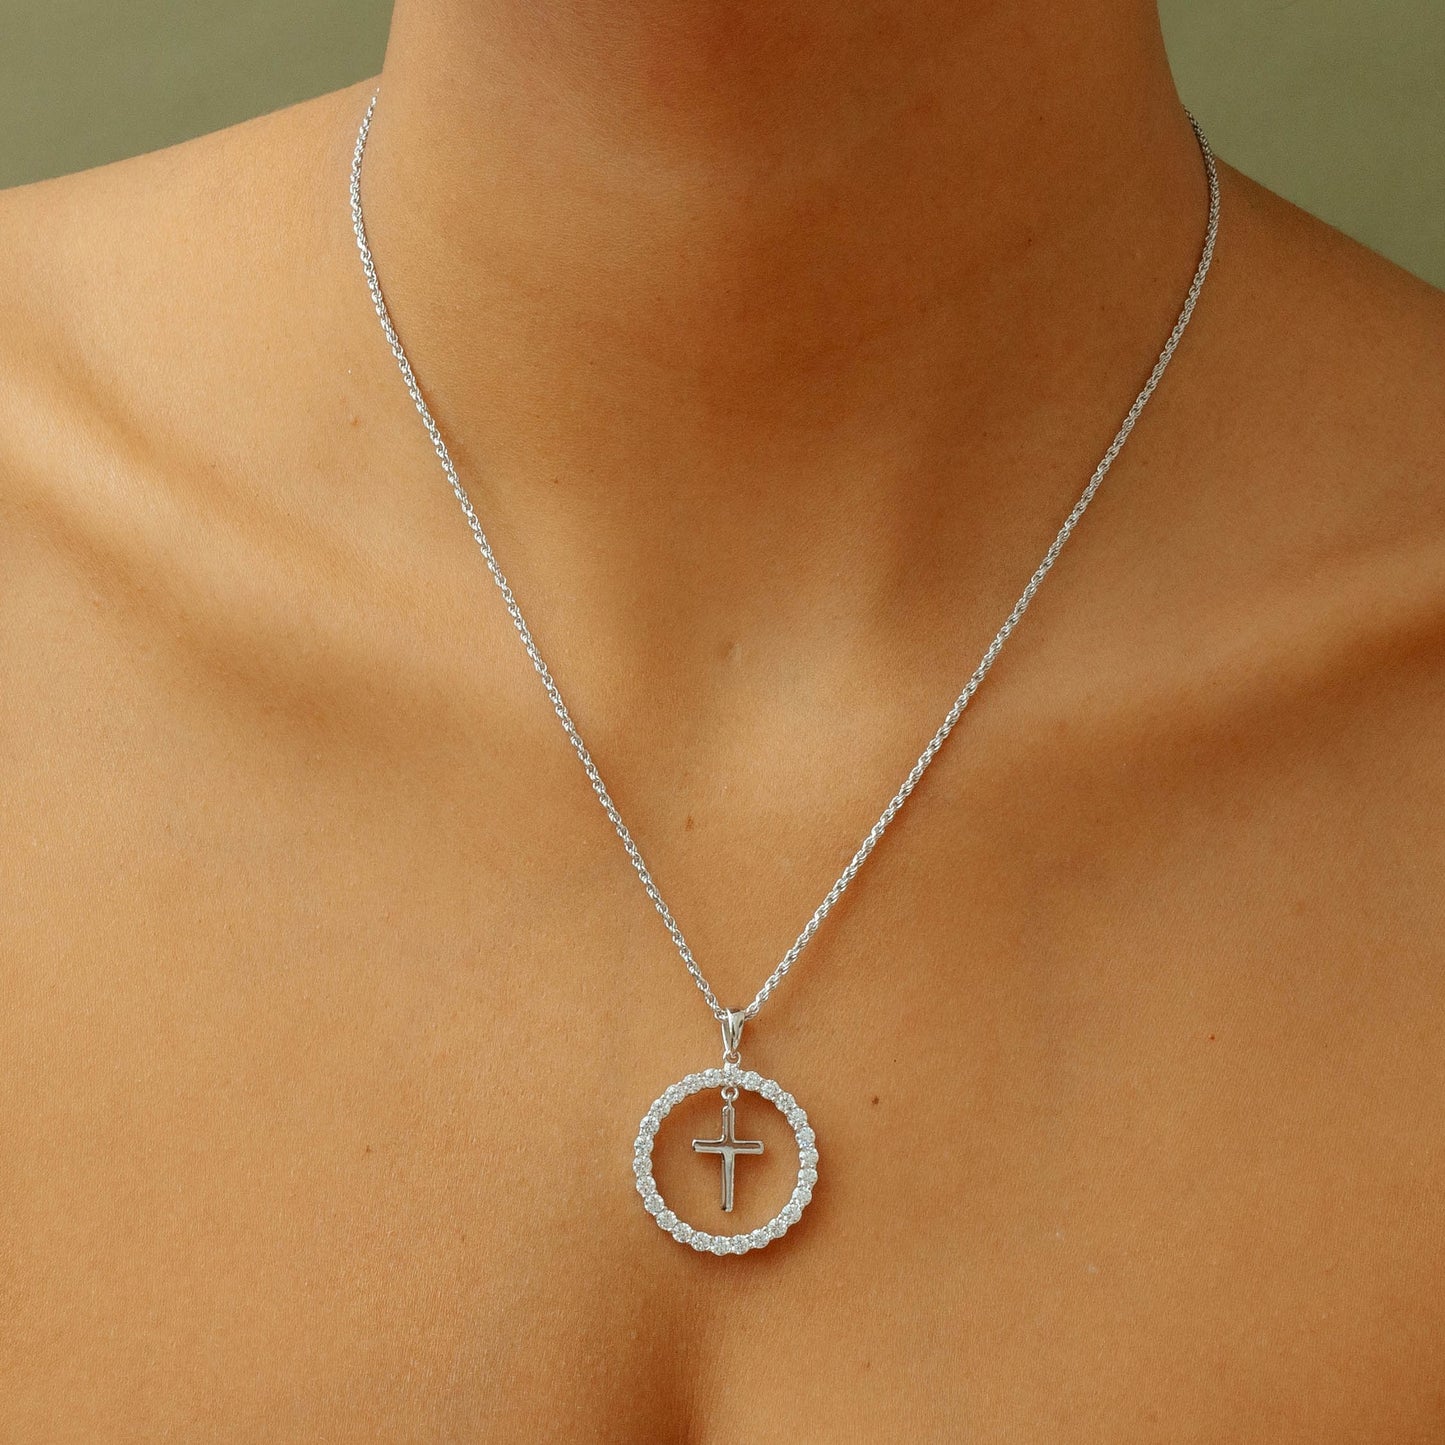 The Iced Coin With Dangling Cross Pendant